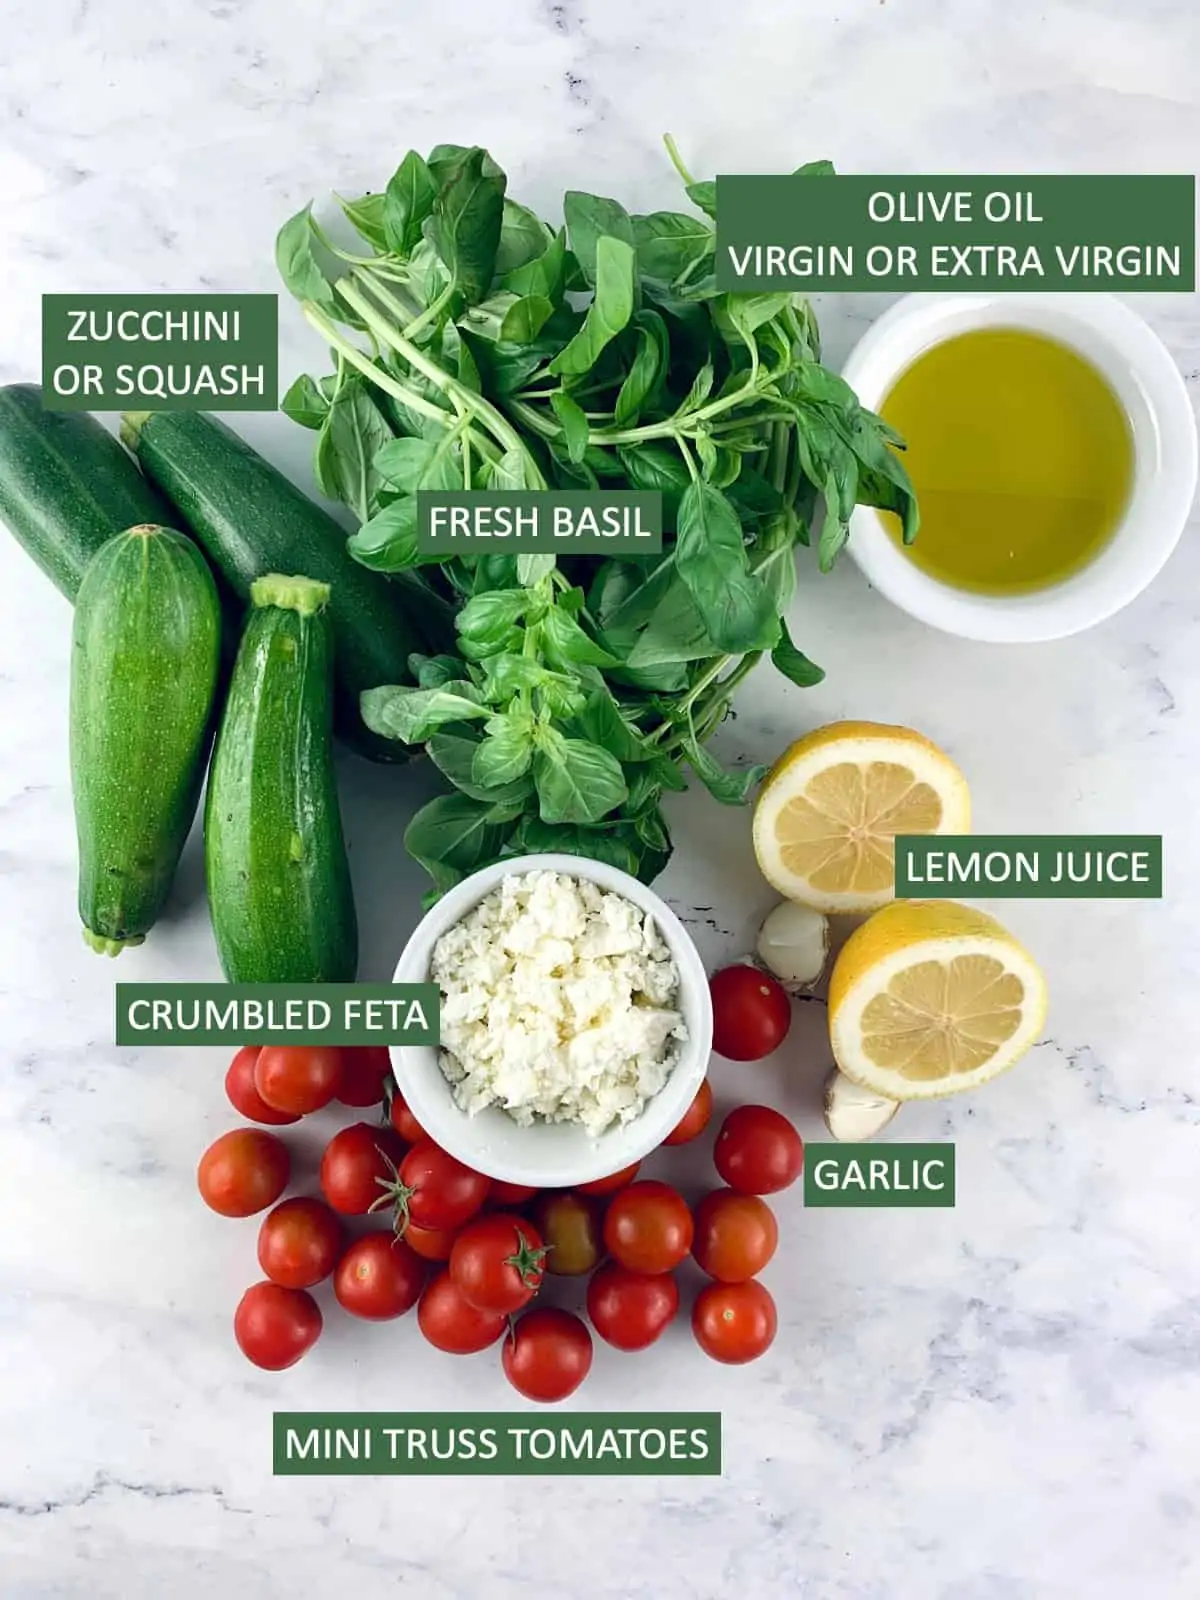 Labelled ingredients needed to make a zucchini tomato salad.